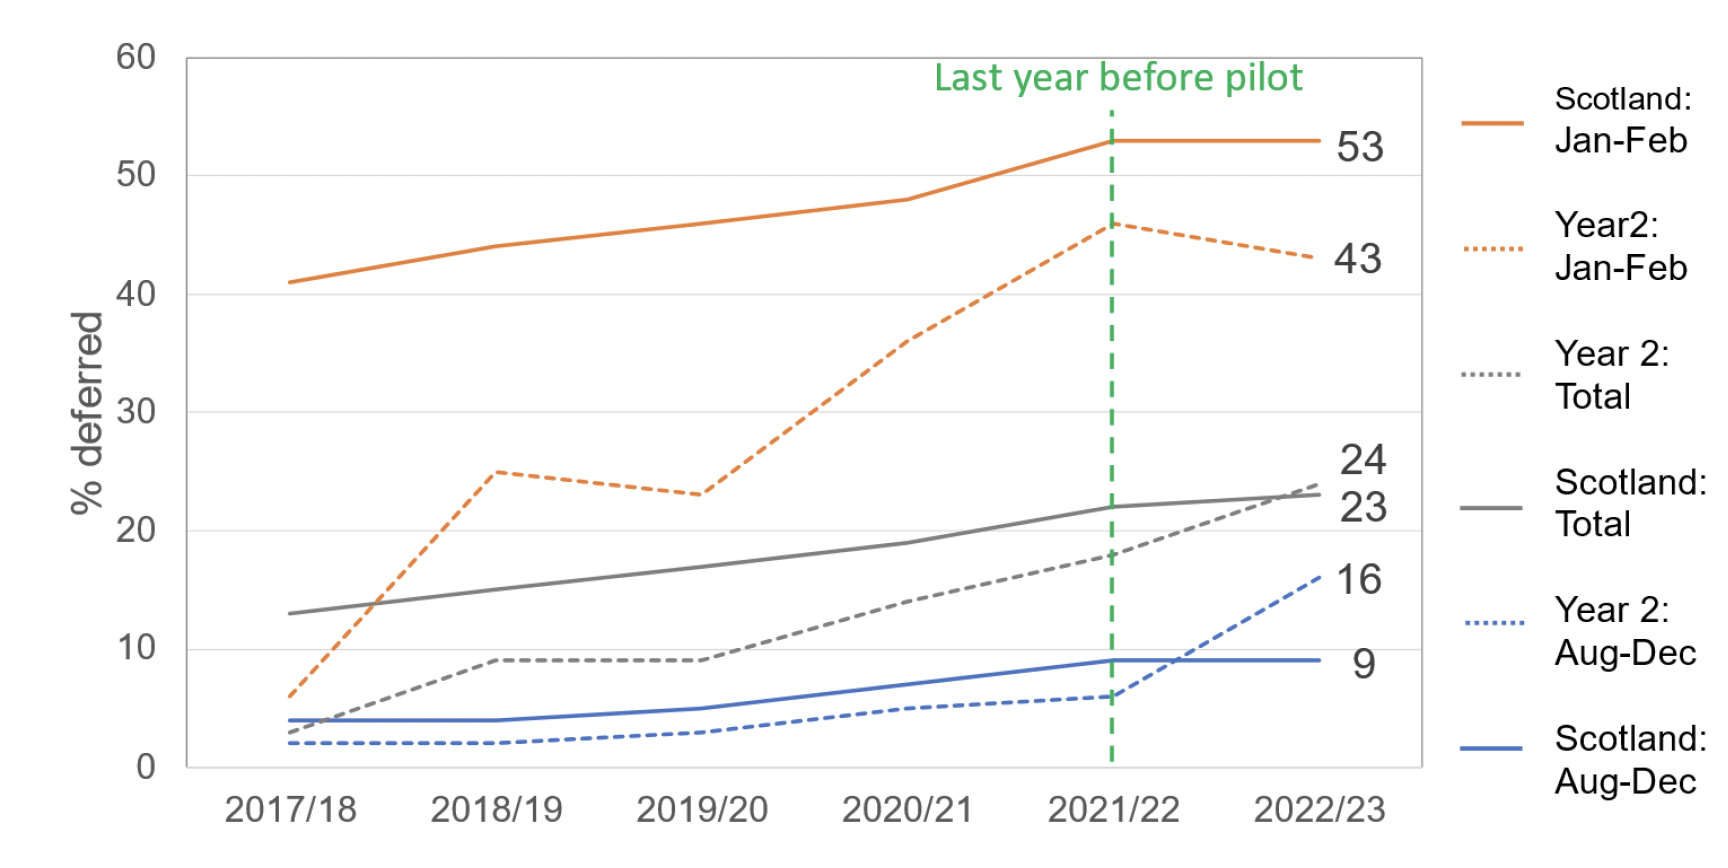 Figure 2.2 is a line chart showing January-February deferral rates for 2017/18 to 2022/23. It compares data for Scotland with that for Year 2 pilot areas. It shows a fairly steep increase in the August to December deferral rate in Year 2 areas since the pilot was implemented in 2021/22 - from 6% to 16%. 